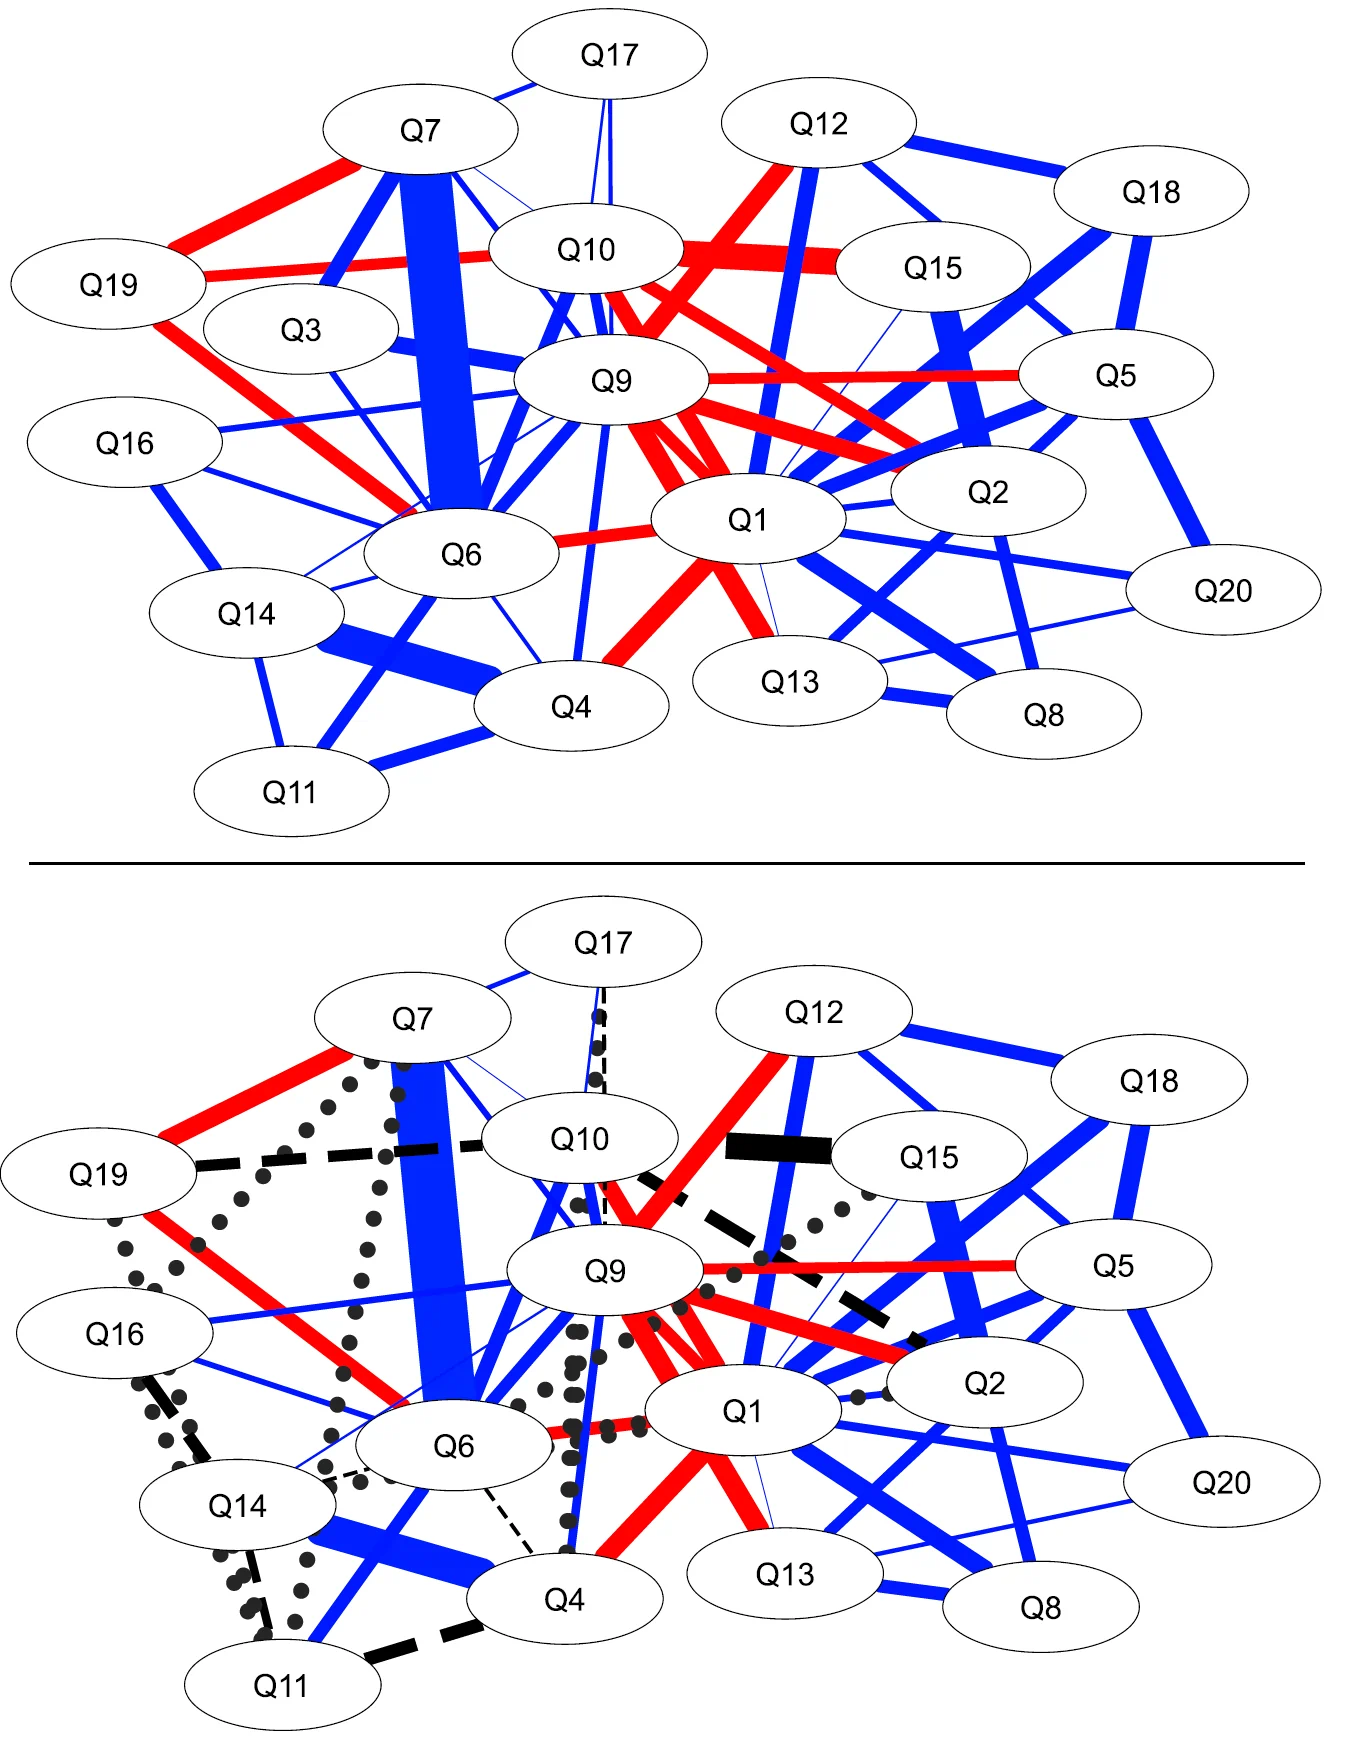 Visualization of a psychometric network using the MACH-IV scale. The top panel shows the full scale network, and the bottom panel shows the network with Q3 removed, highlighting changes in edge detection and correlation strengths, with red edges indicating negative associations, blue for positive, and dashed black lines showing missing edges due to Q3's removal.